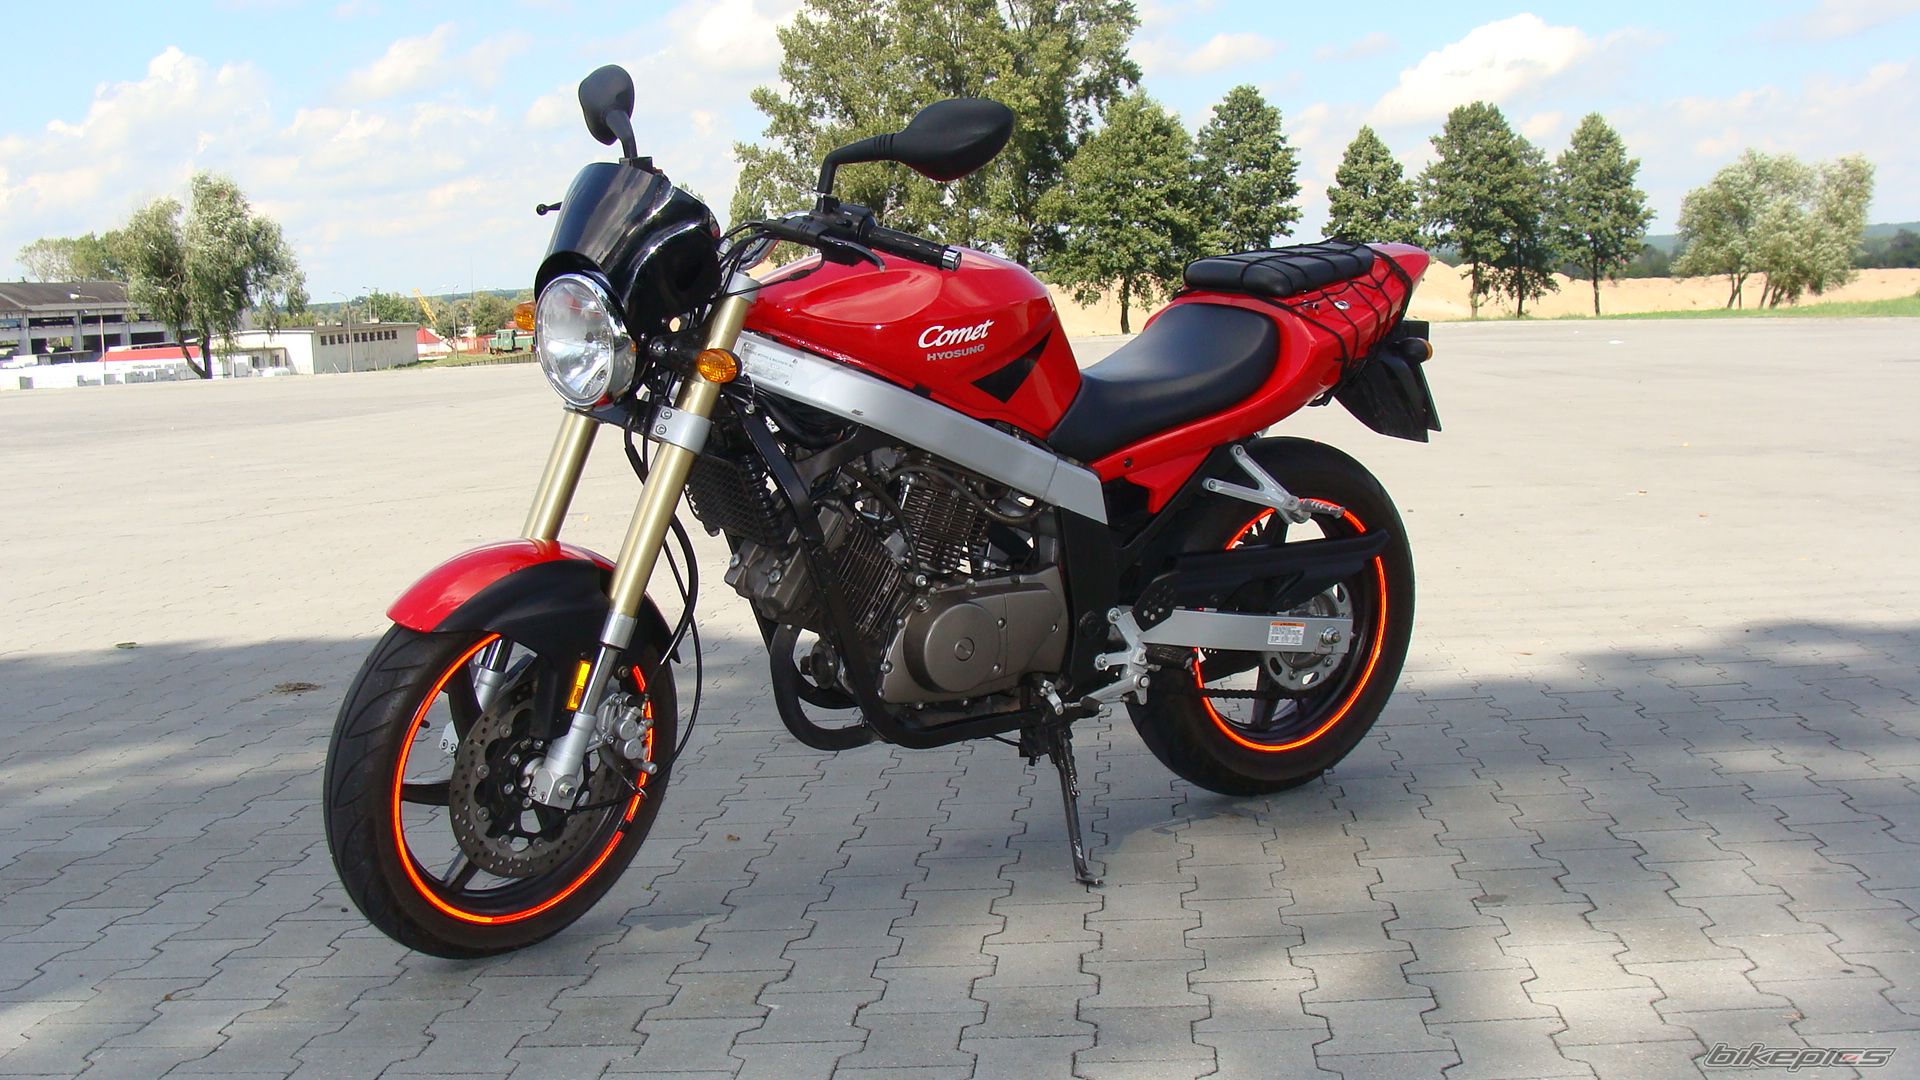 2004 Hyosung GT 250 Comet Photos, Informations, Articles 